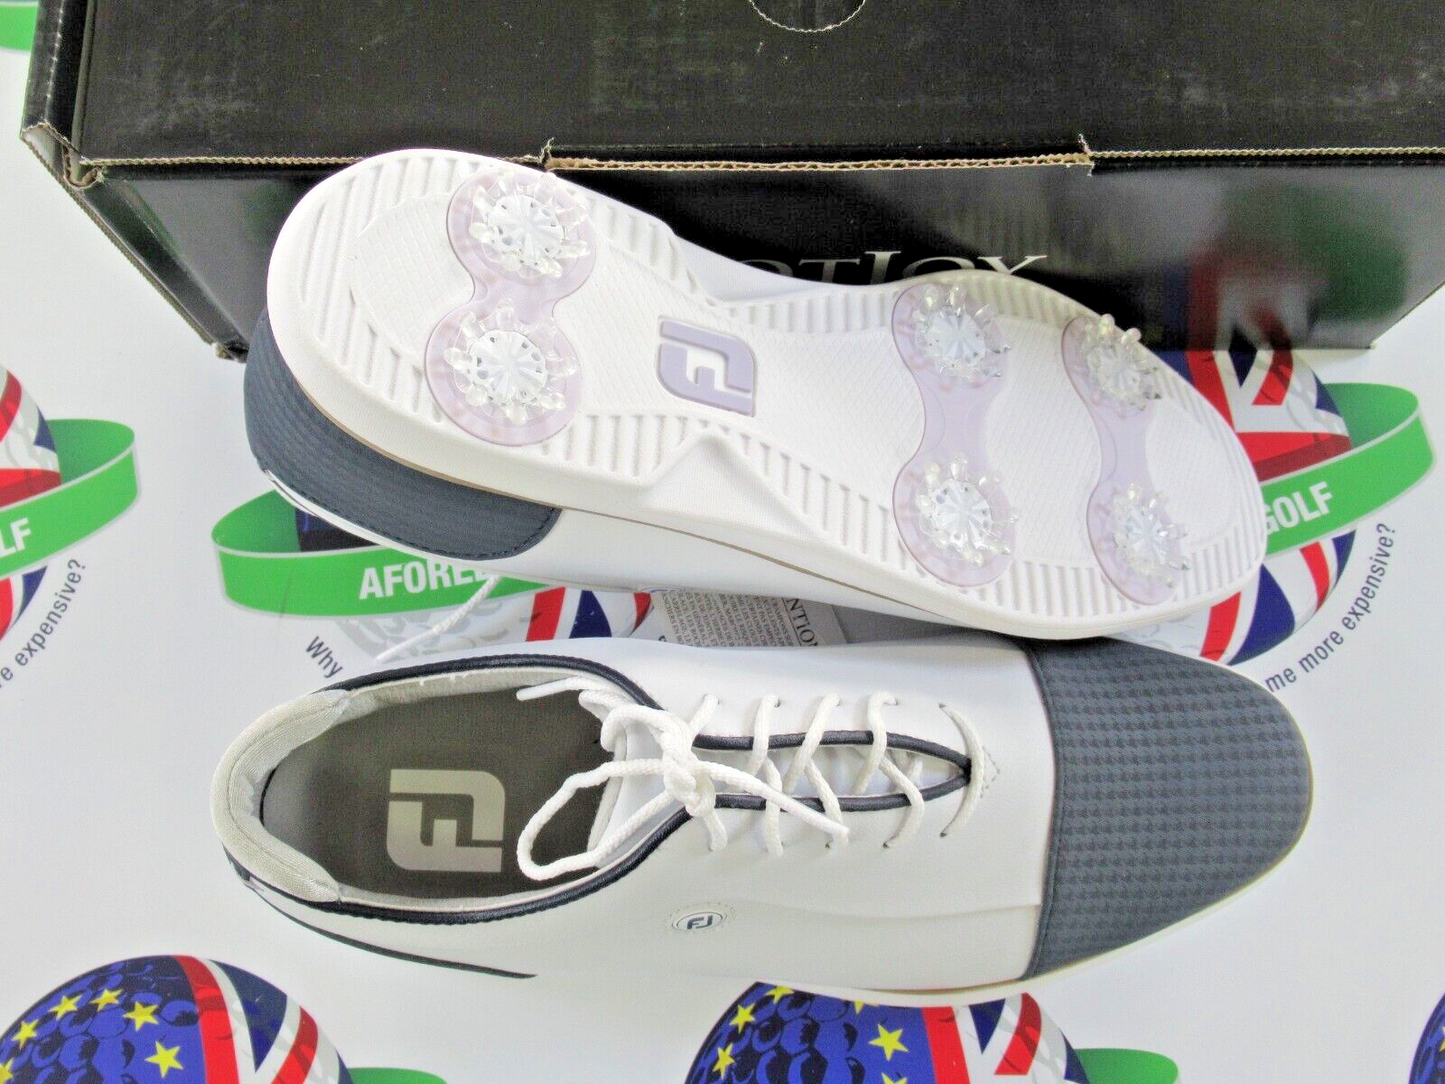 footjoy fj traditions womens golf shoes 97915k white/navy size 6.5 wide/large